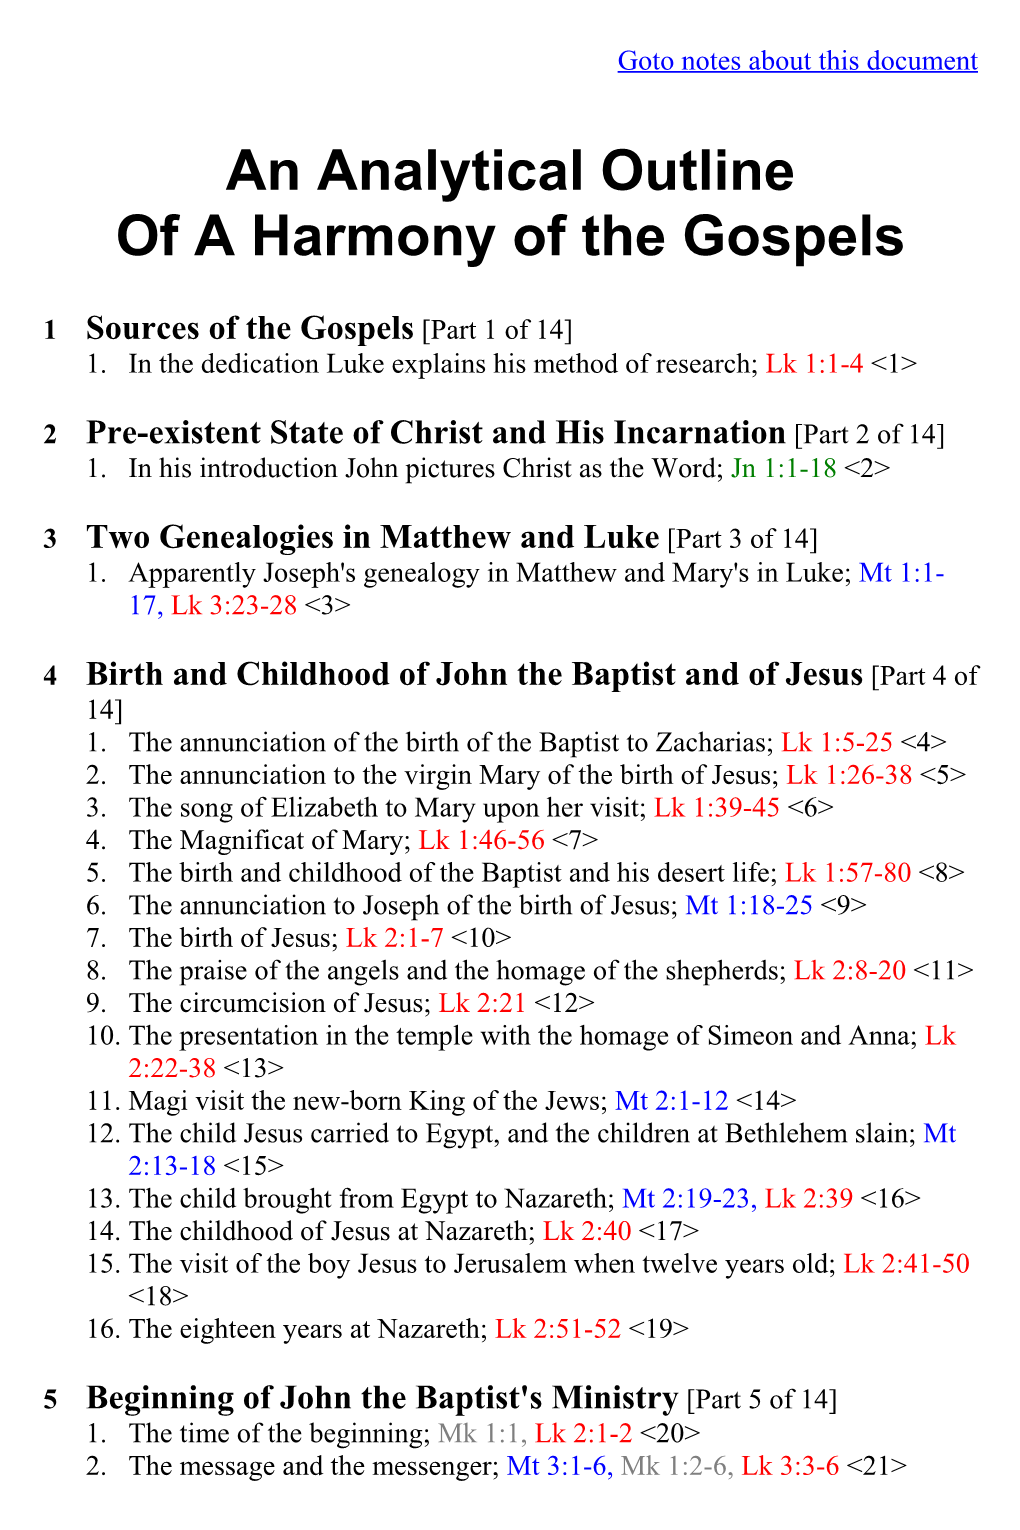 An Analytical Outline of a Harmony of the Gospels